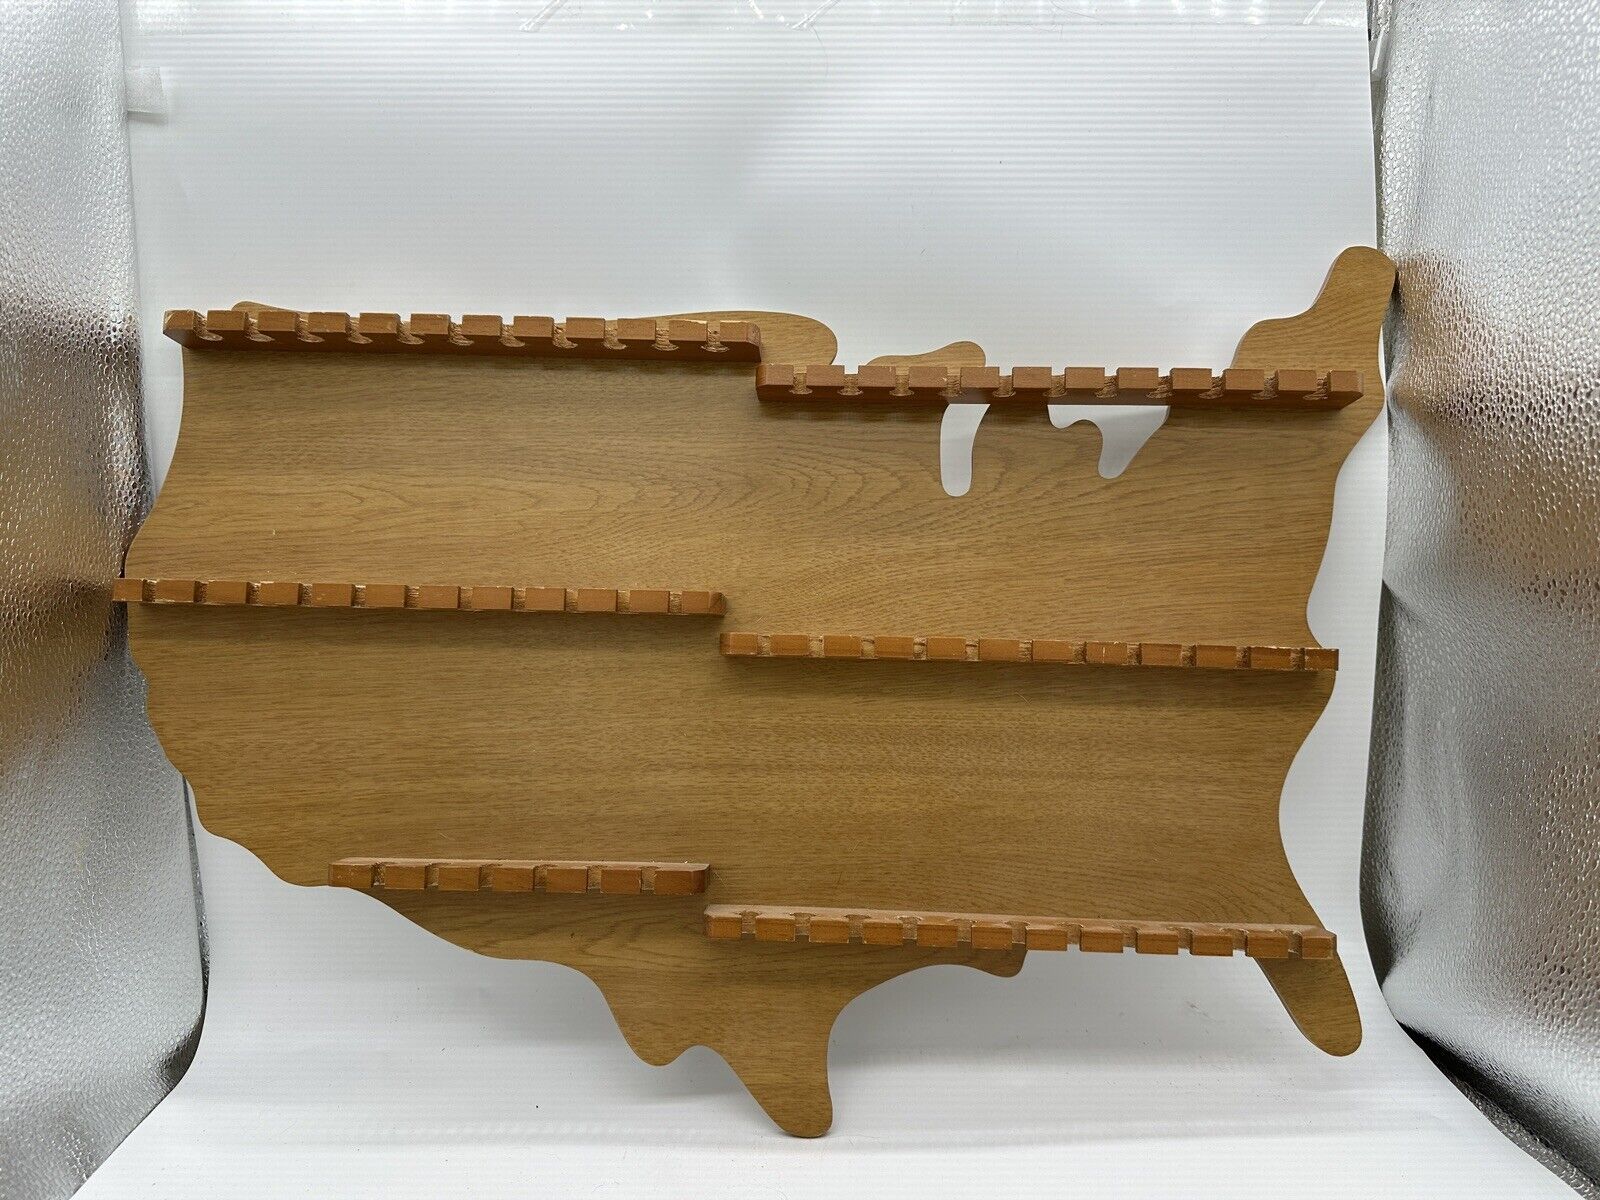 Unique souvenir spoon holder display rack shaped like map of USA